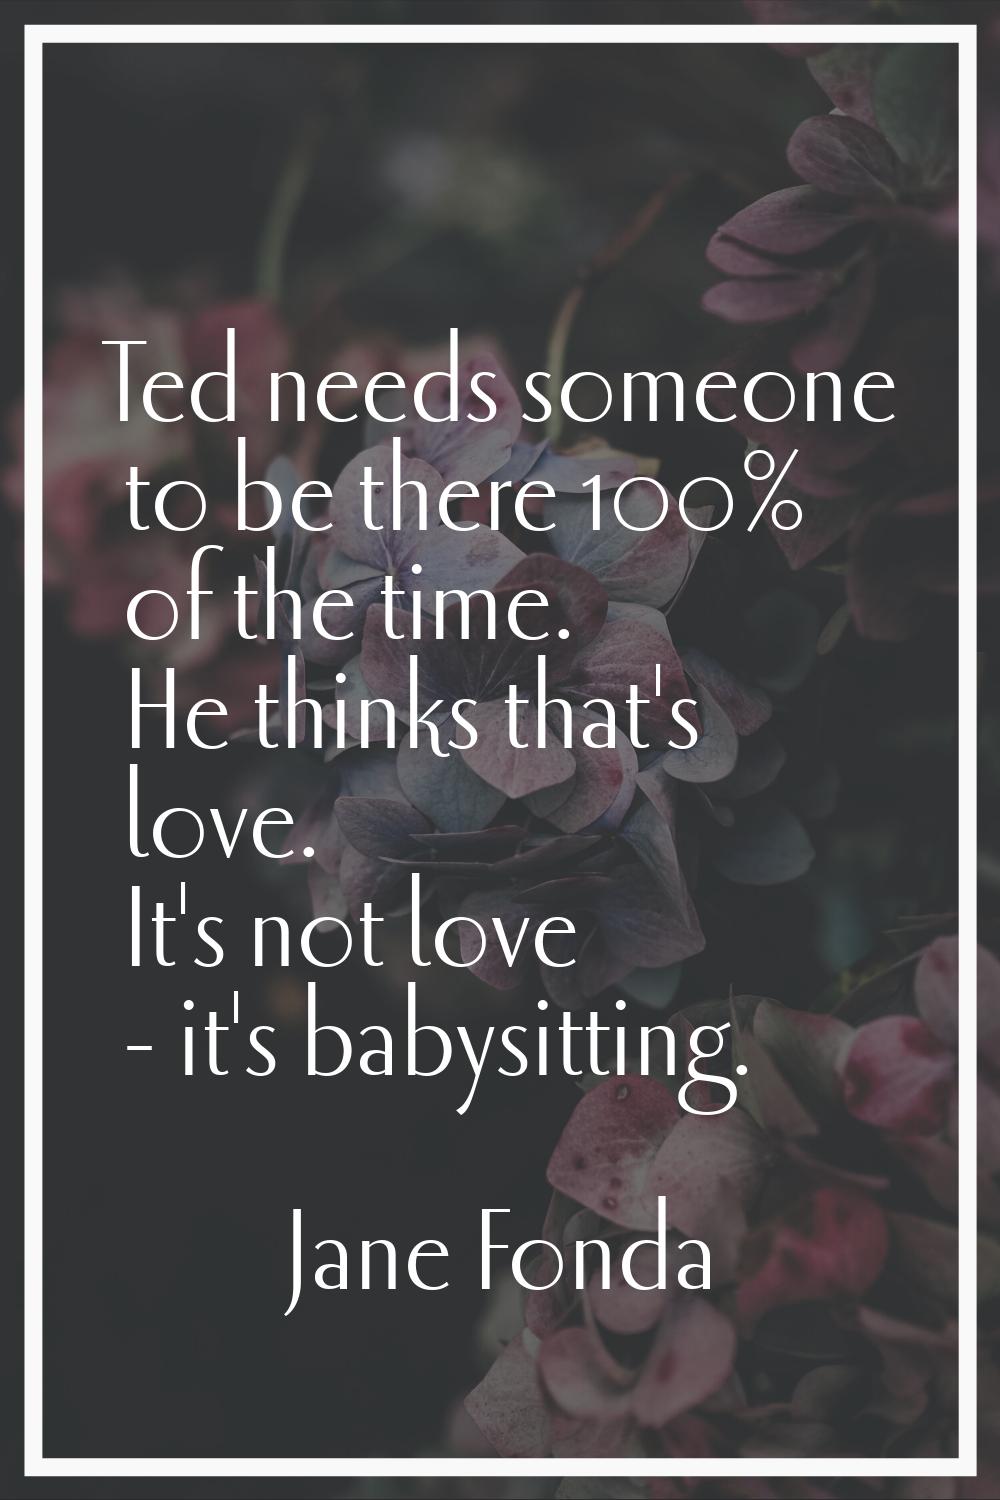 Ted needs someone to be there 100% of the time. He thinks that's love. It's not love - it's babysit